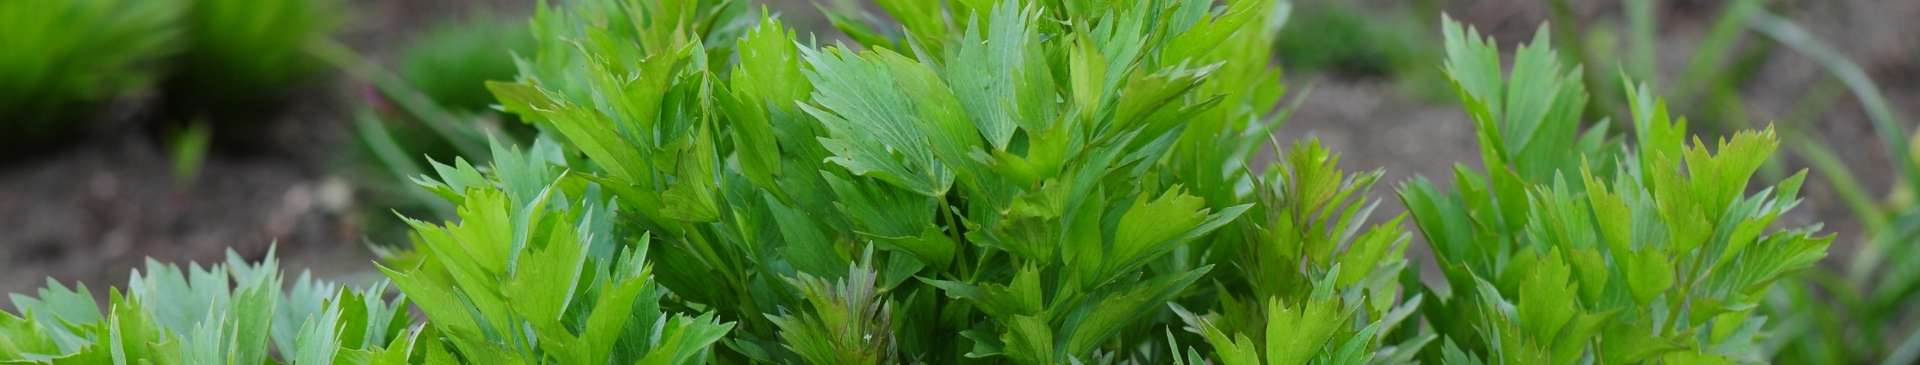 Lovage: An Underappreciated Herb That's Easy to Grow